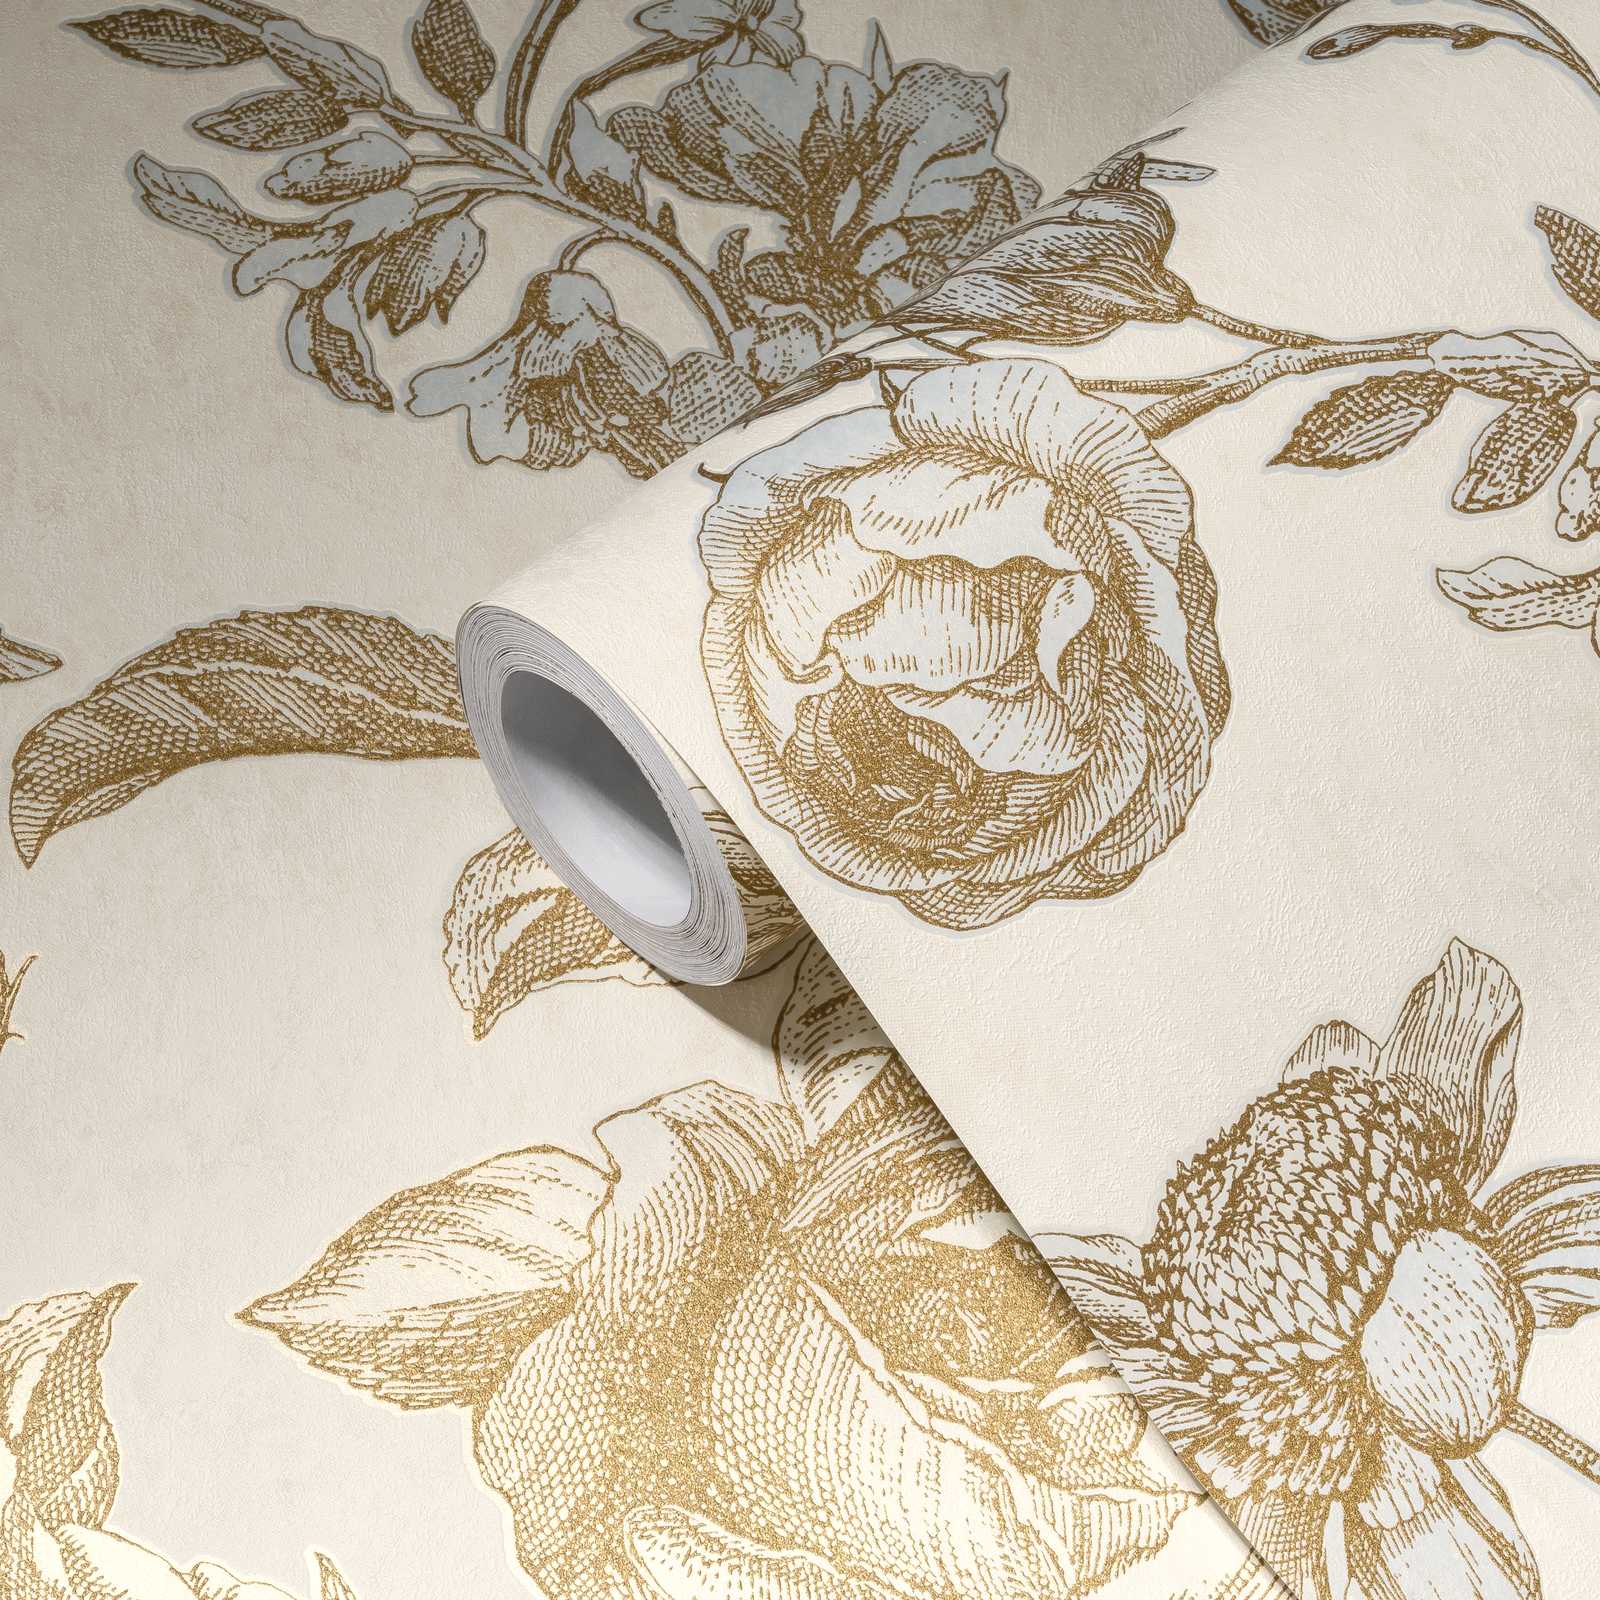             Vintage wallpaper with roses pattern in graphic style - metallic, cream
        